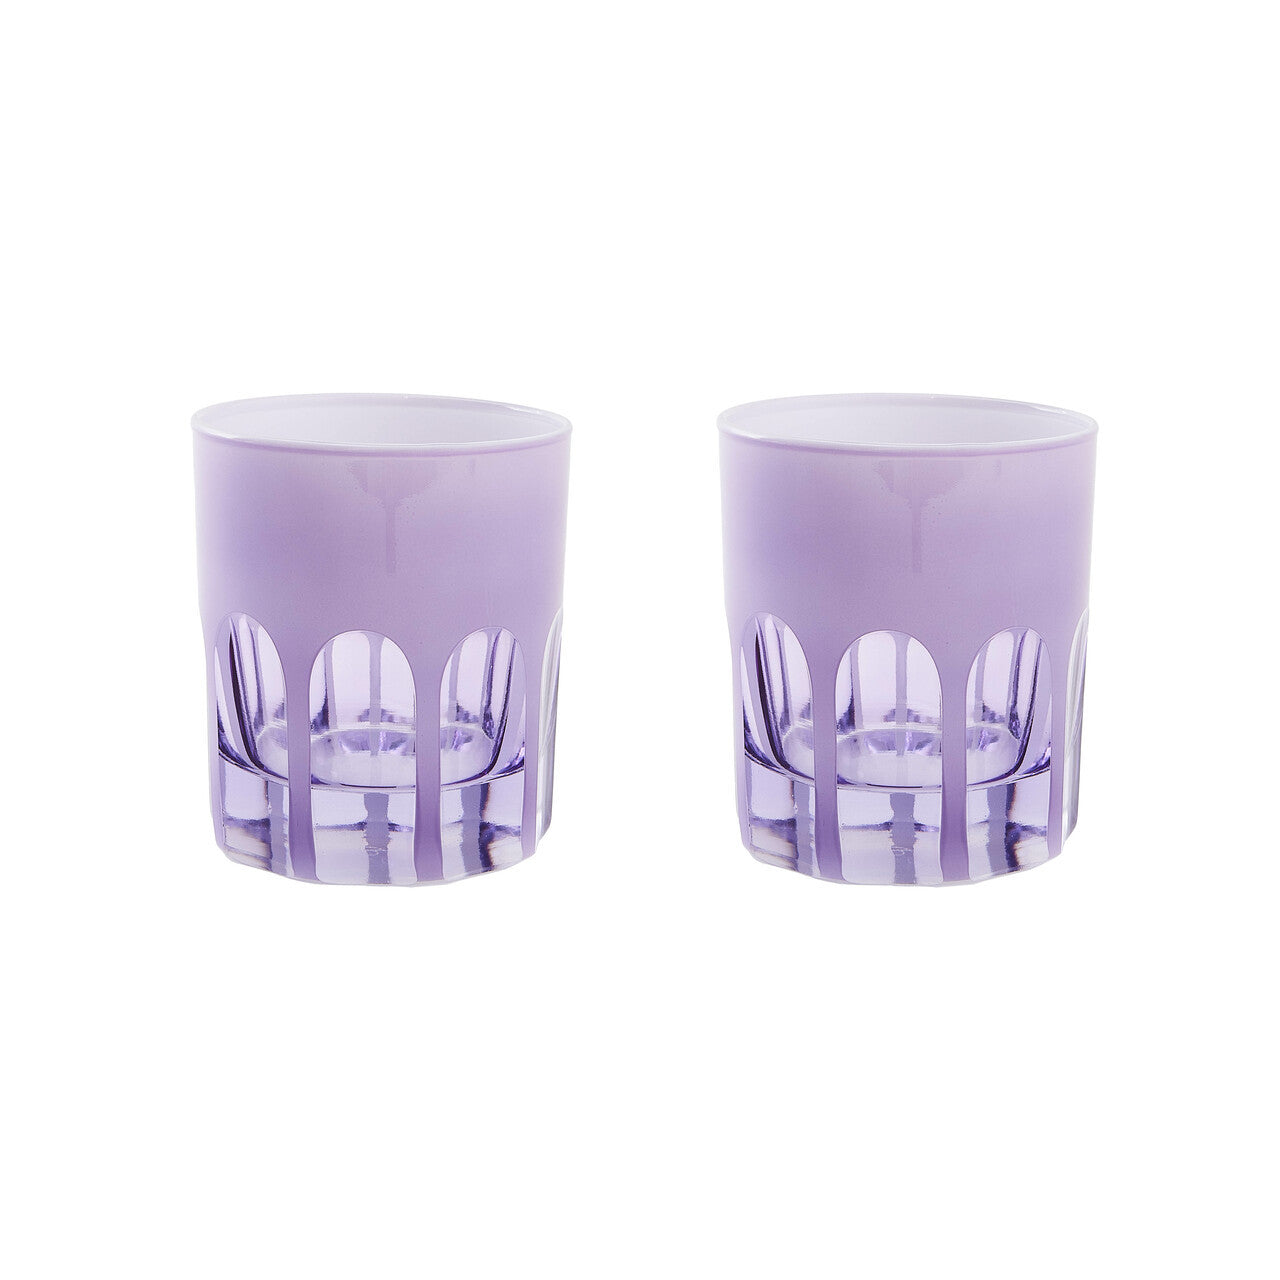 Two festive Set of 2 Rialto Lupine (Light Purple) Glasses by SIR/MADAM on a white background.